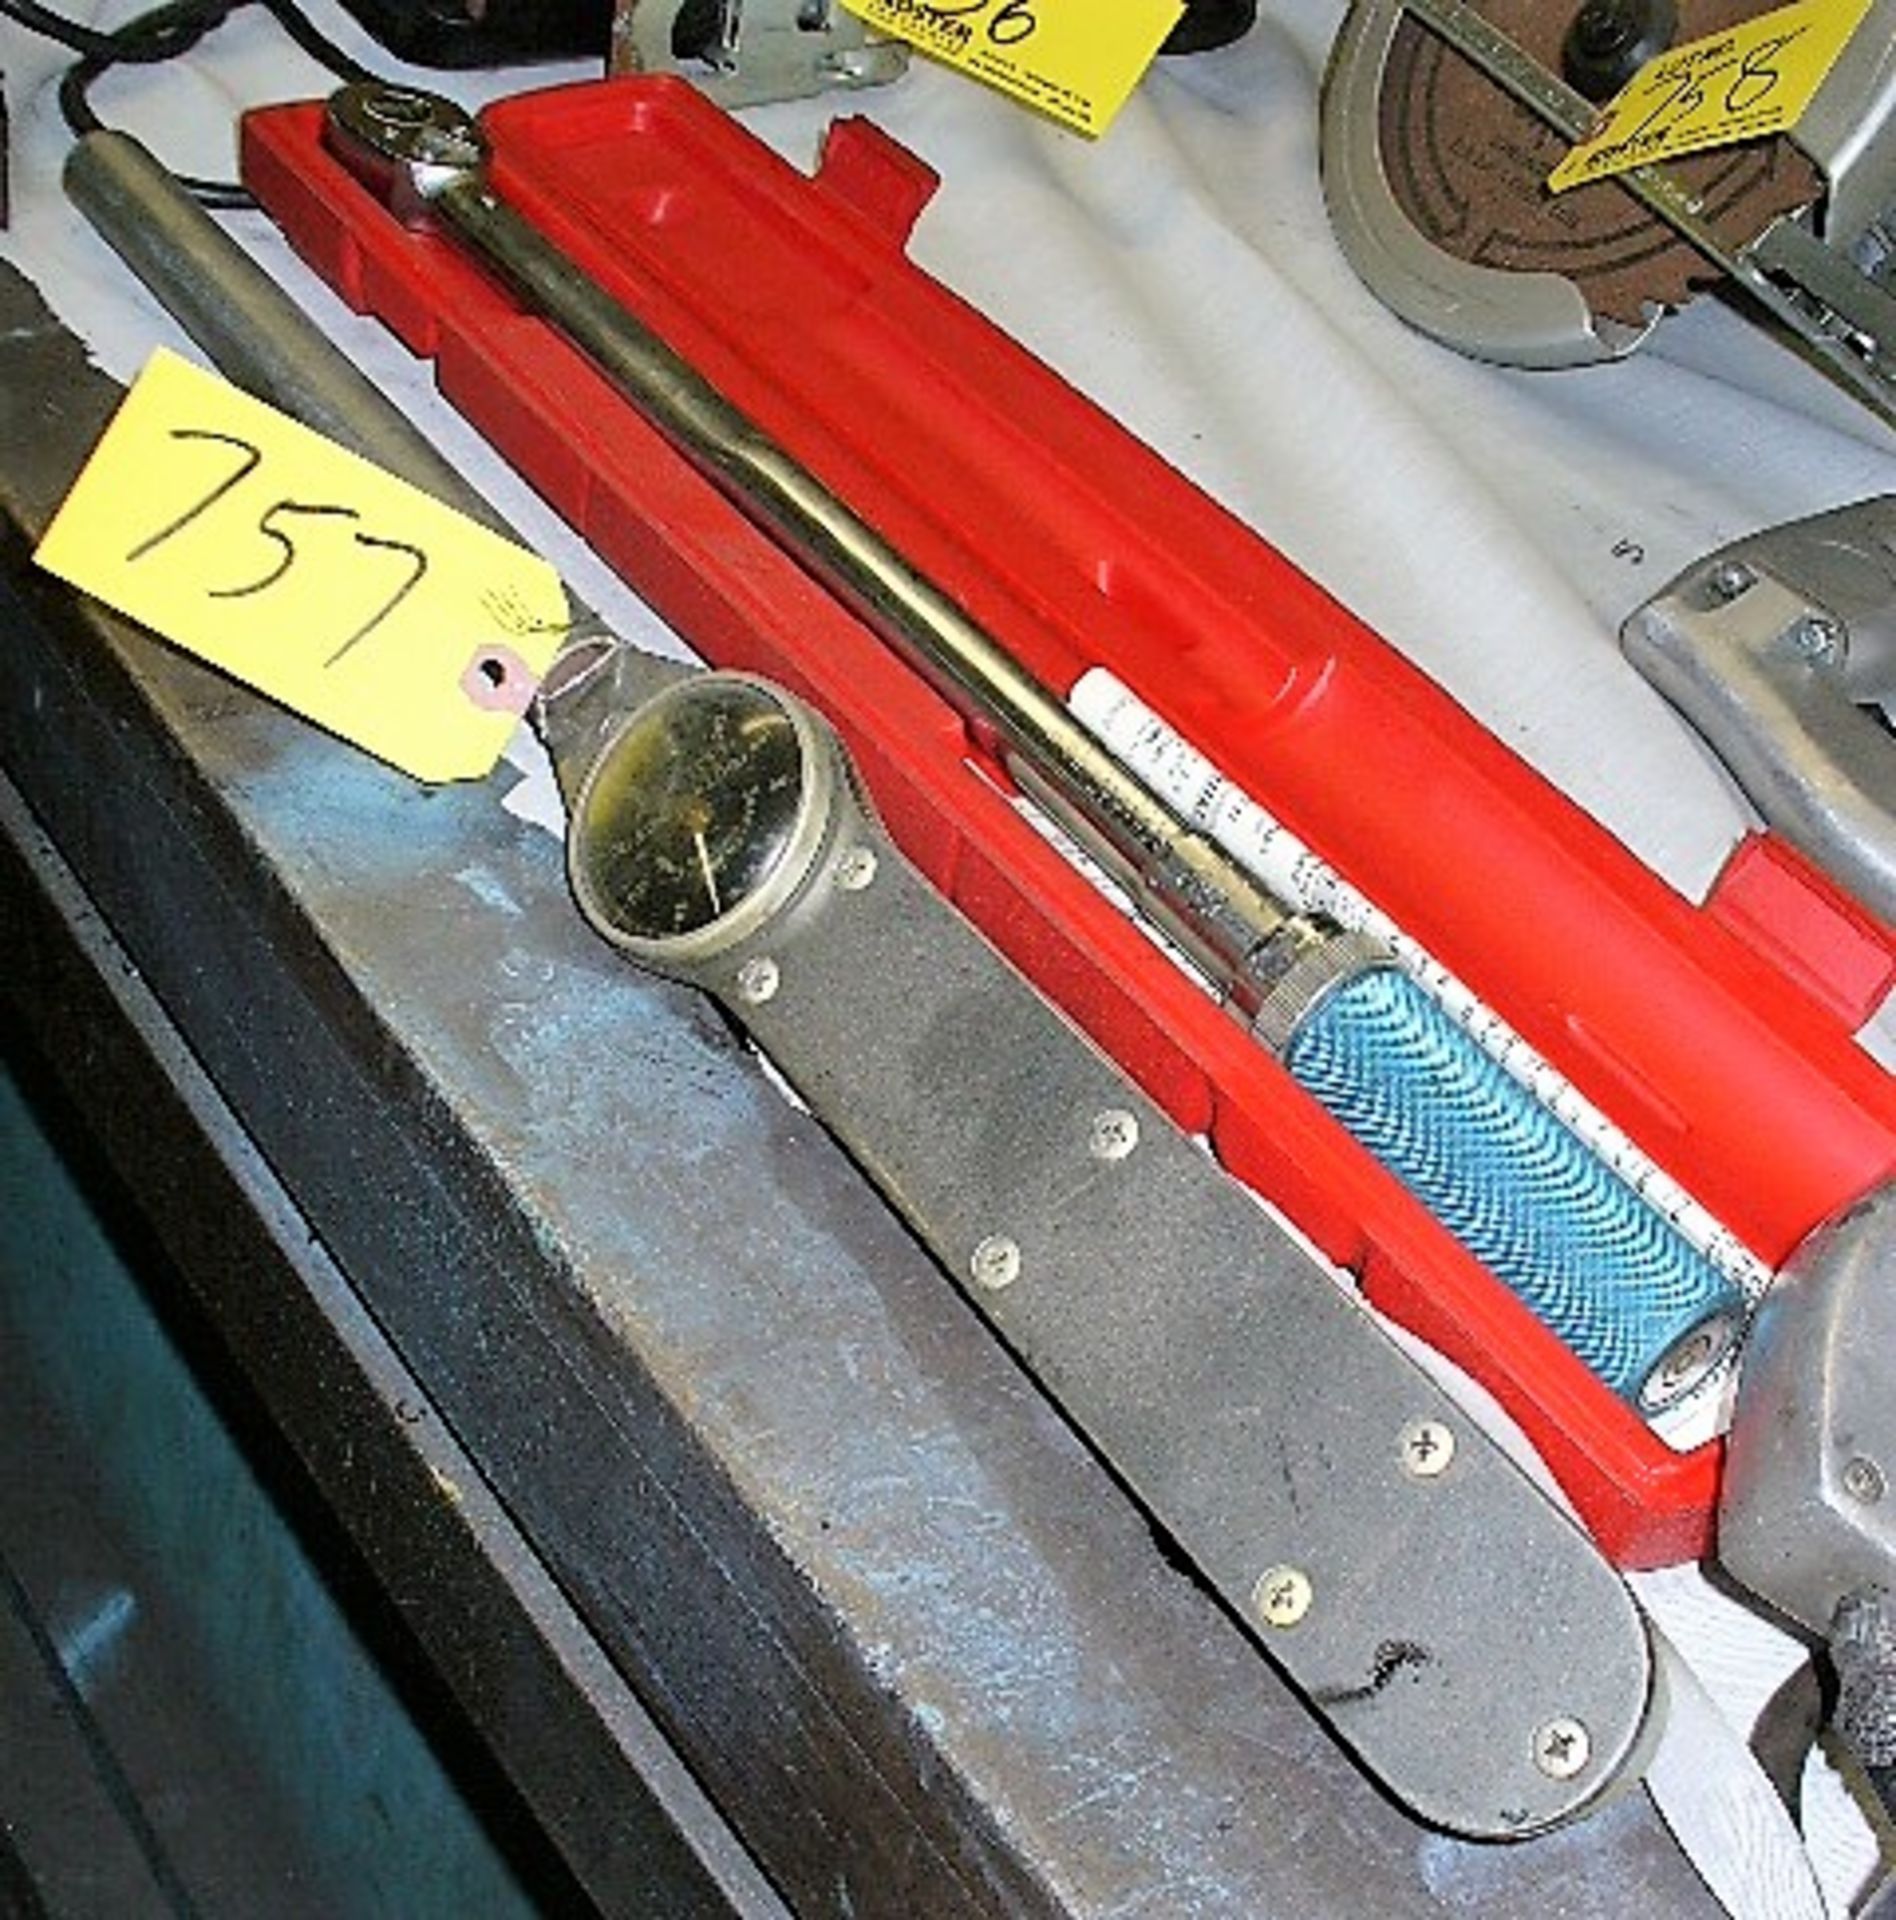 (2) SNAP-ON TORQUE WRENCHES